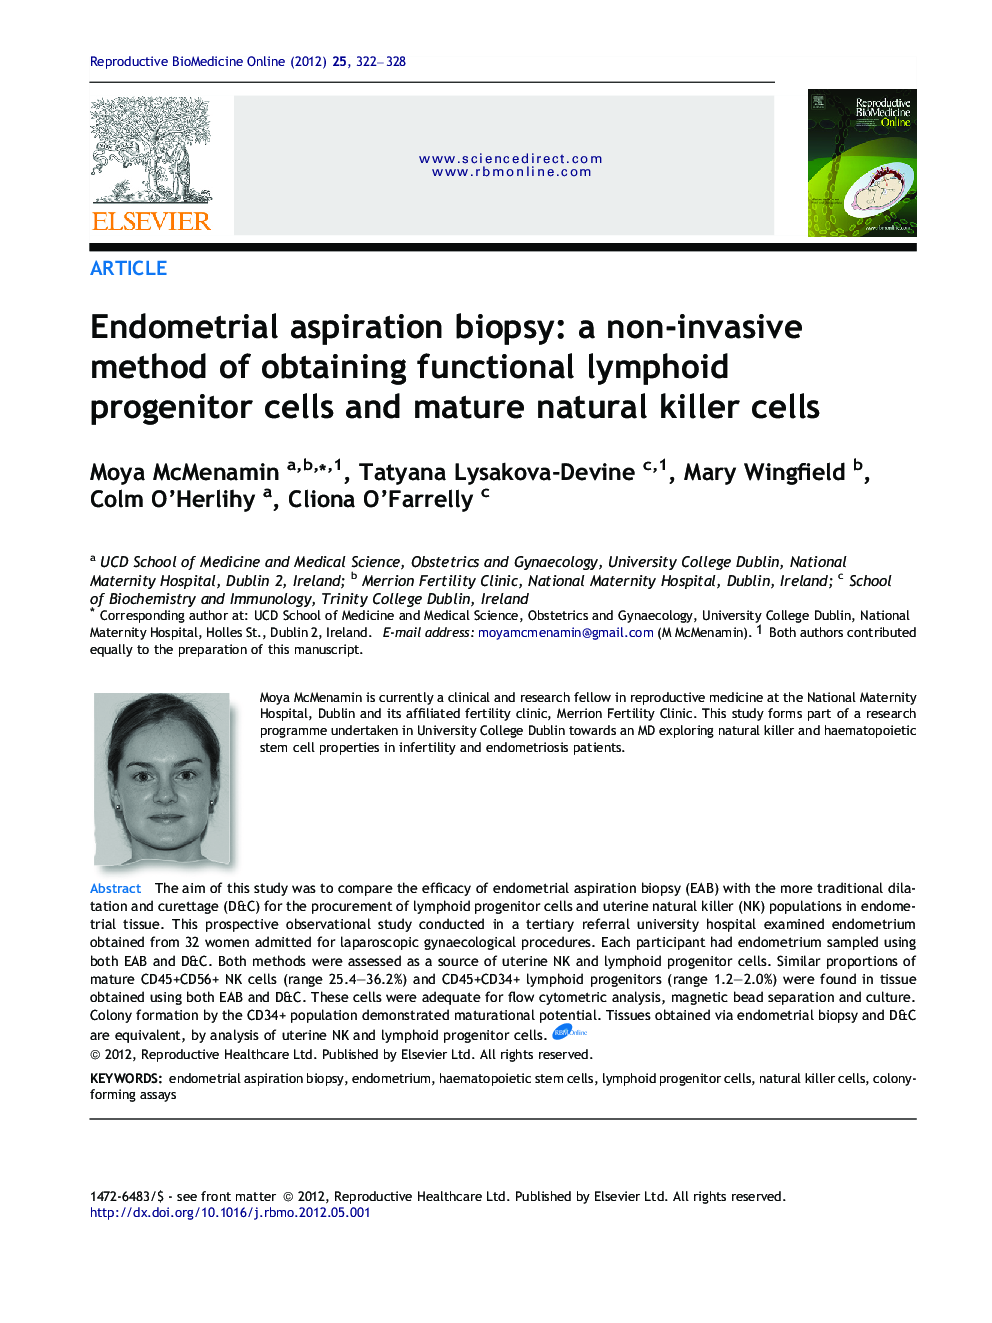 Endometrial aspiration biopsy: a non-invasive method of obtaining functional lymphoid progenitor cells and mature natural killer cells 